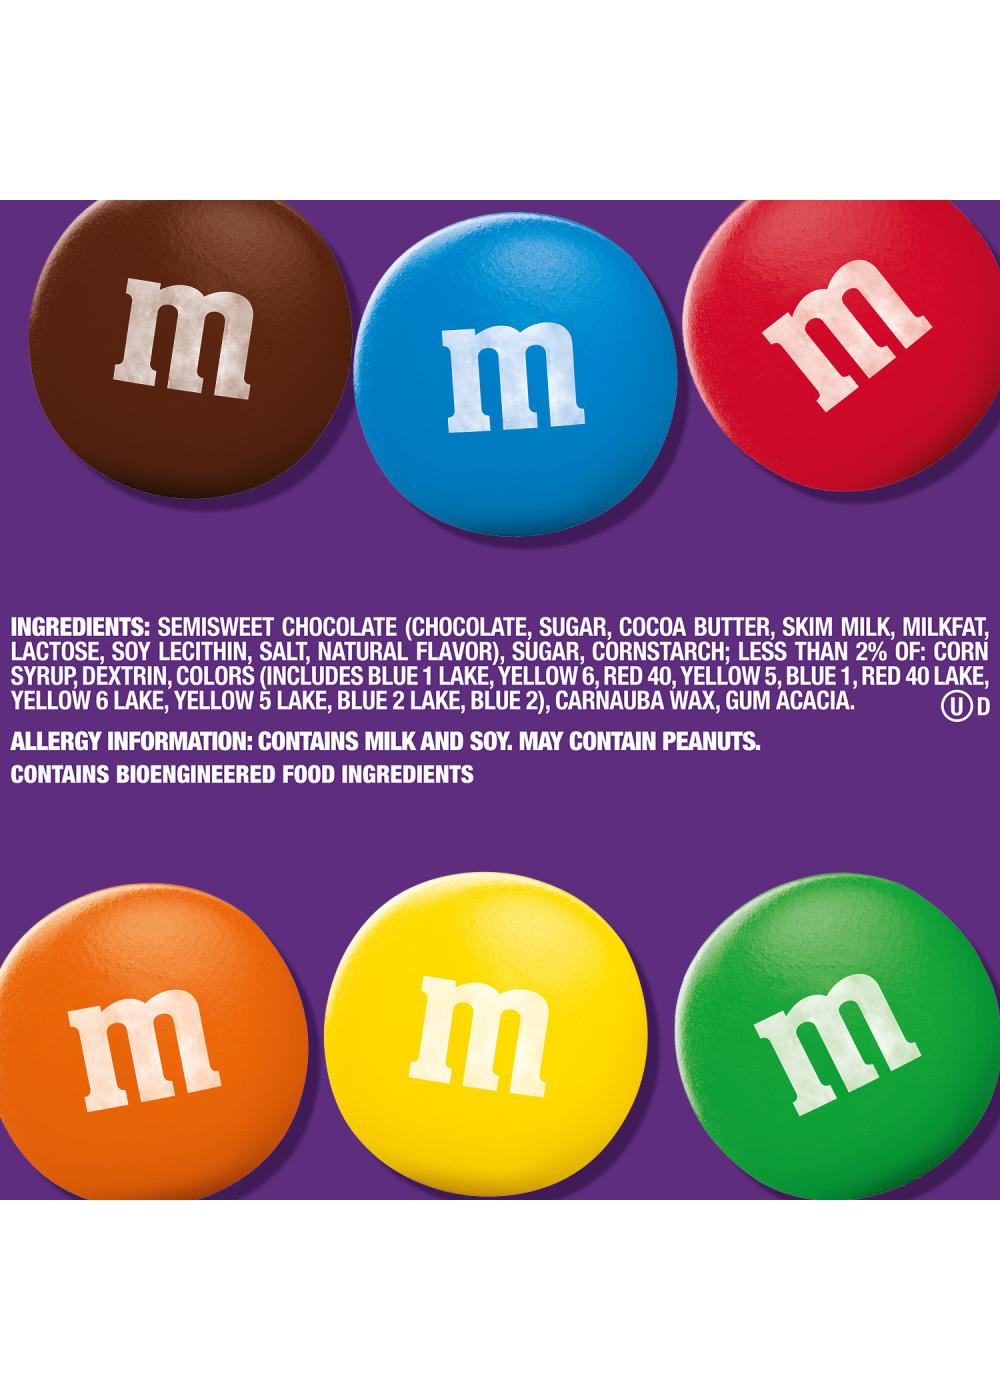 M&M'S Dark Chocolate Candy - Family Size - Shop Candy at H-E-B